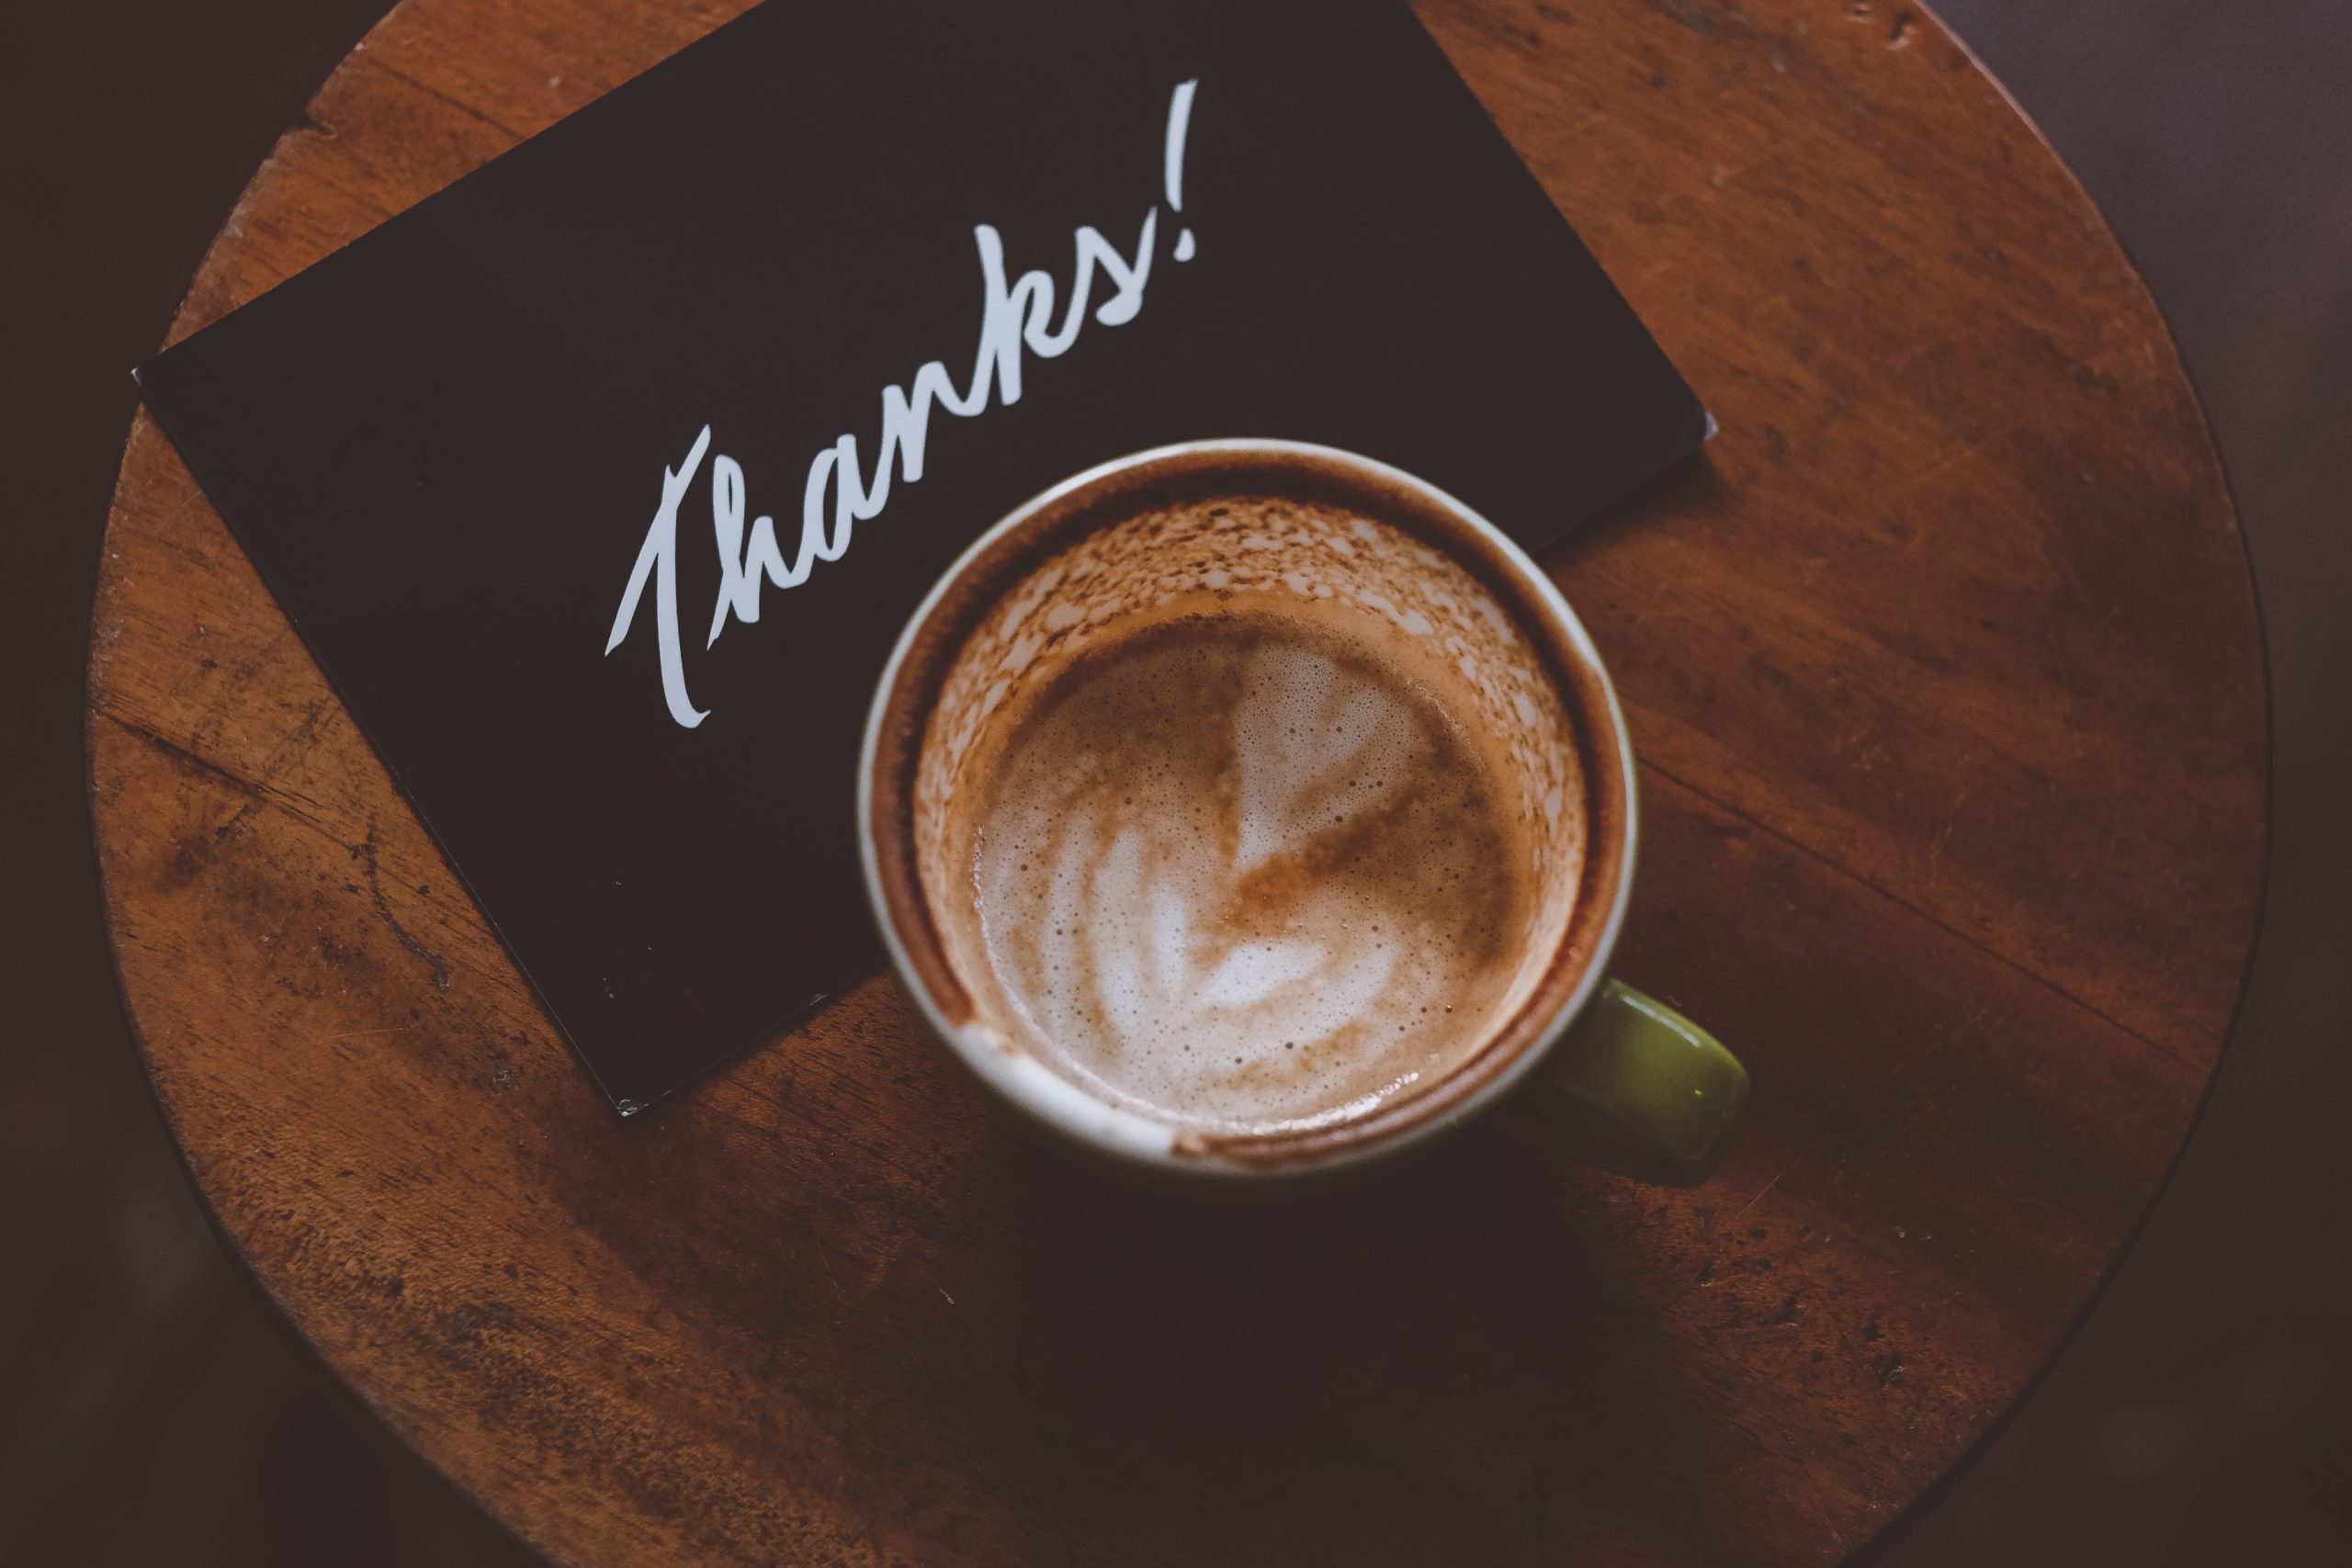 how to show client appreciation - and co from fiverr